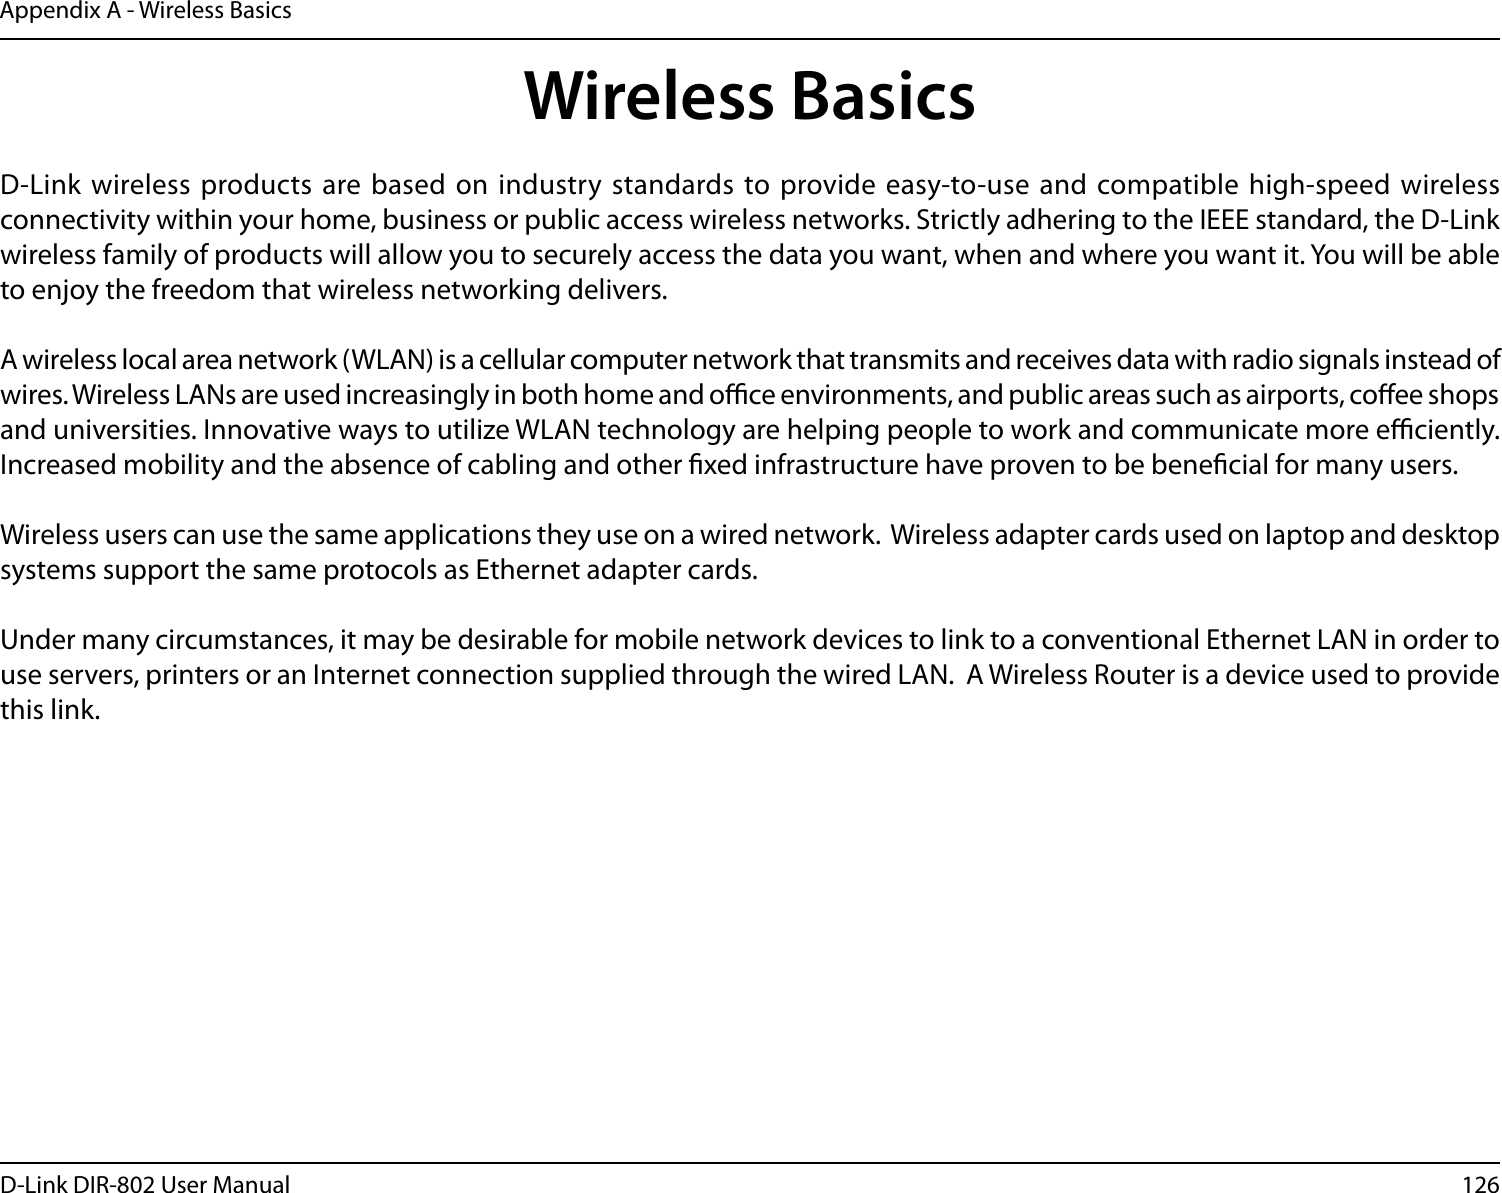 126D-Link DIR-802 User ManualAppendix A - Wireless BasicsD-Link  wireless products are based  on industry standards to provide easy-to-use  and compatible high-speed  wireless connectivity within your home, business or public access wireless networks. Strictly adhering to the IEEE standard, the D-Link wireless family of products will allow you to securely access the data you want, when and where you want it. You will be able to enjoy the freedom that wireless networking delivers.A wireless local area network (WLAN) is a cellular computer network that transmits and receives data with radio signals instead of wires. Wireless LANs are used increasingly in both home and oce environments, and public areas such as airports, coee shops and universities. Innovative ways to utilize WLAN technology are helping people to work and communicate more eciently. Increased mobility and the absence of cabling and other xed infrastructure have proven to be benecial for many users. Wireless users can use the same applications they use on a wired network.  Wireless adapter cards used on laptop and desktop systems support the same protocols as Ethernet adapter cards. Under many circumstances, it may be desirable for mobile network devices to link to a conventional Ethernet LAN in order to use servers, printers or an Internet connection supplied through the wired LAN.  A Wireless Router is a device used to provide this link.Wireless Basics